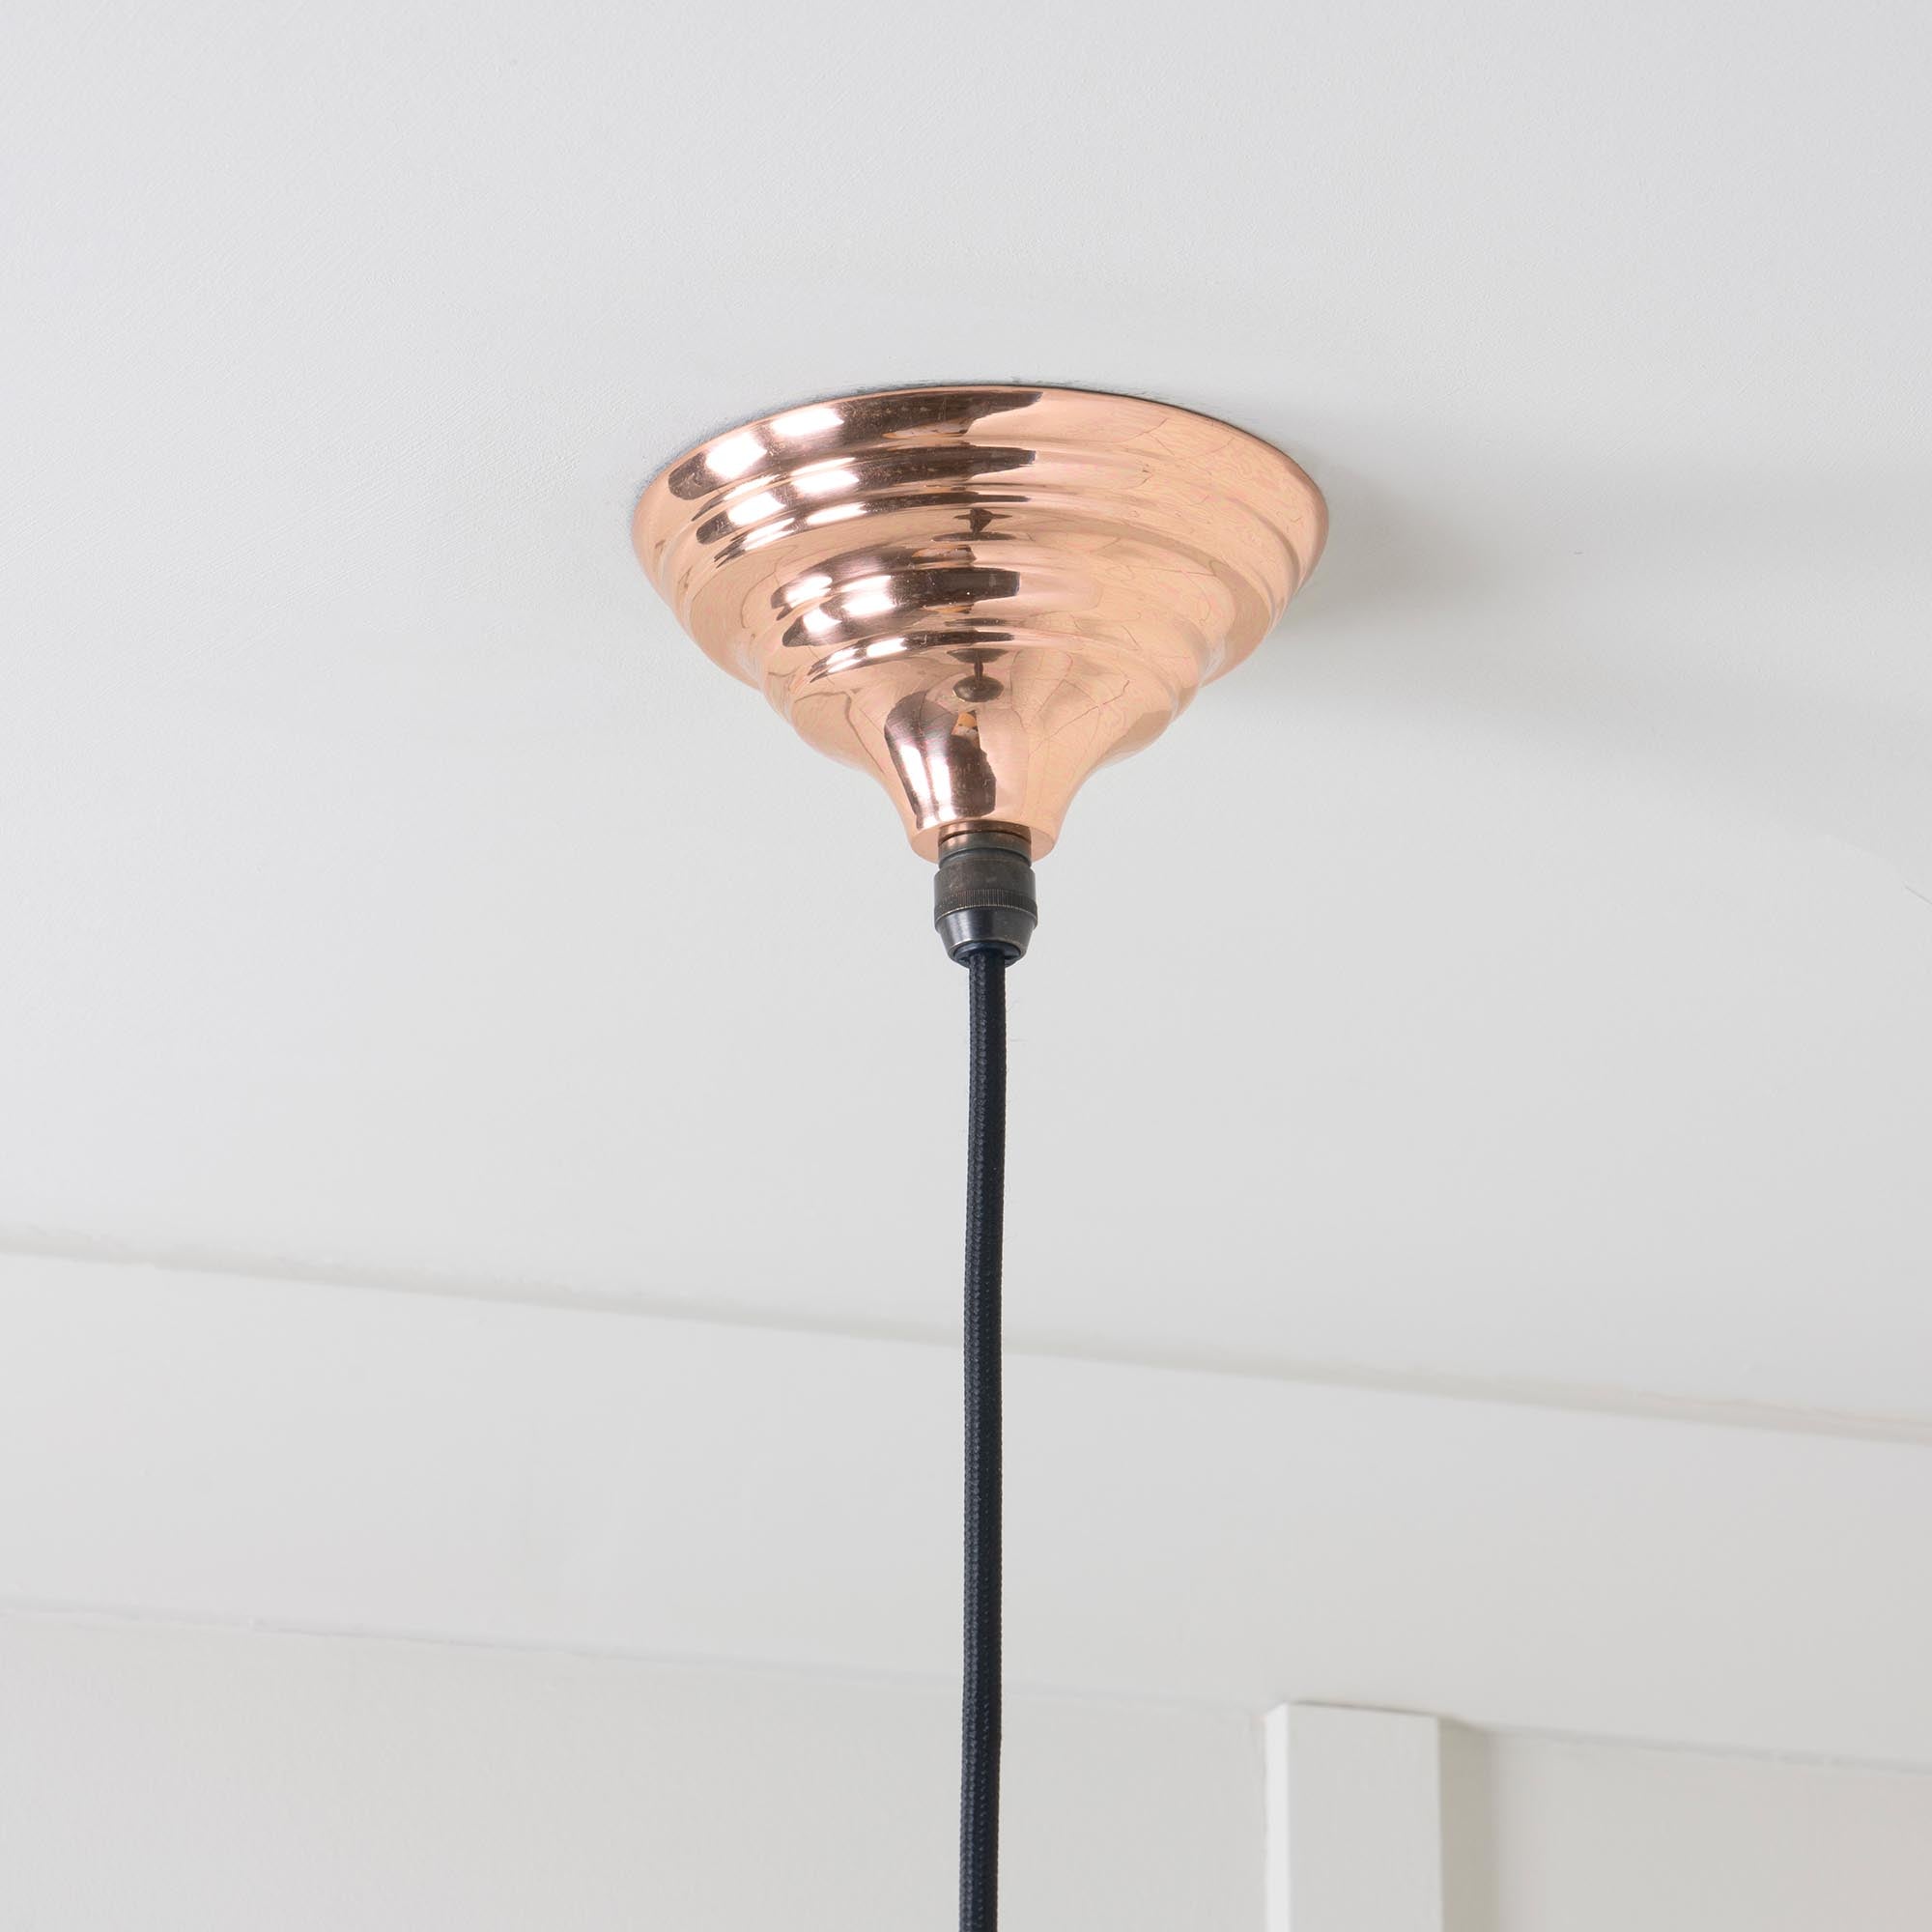 SHOW Close Up Image of Ceiling Rose for Brindley Ceiling Light in Copper